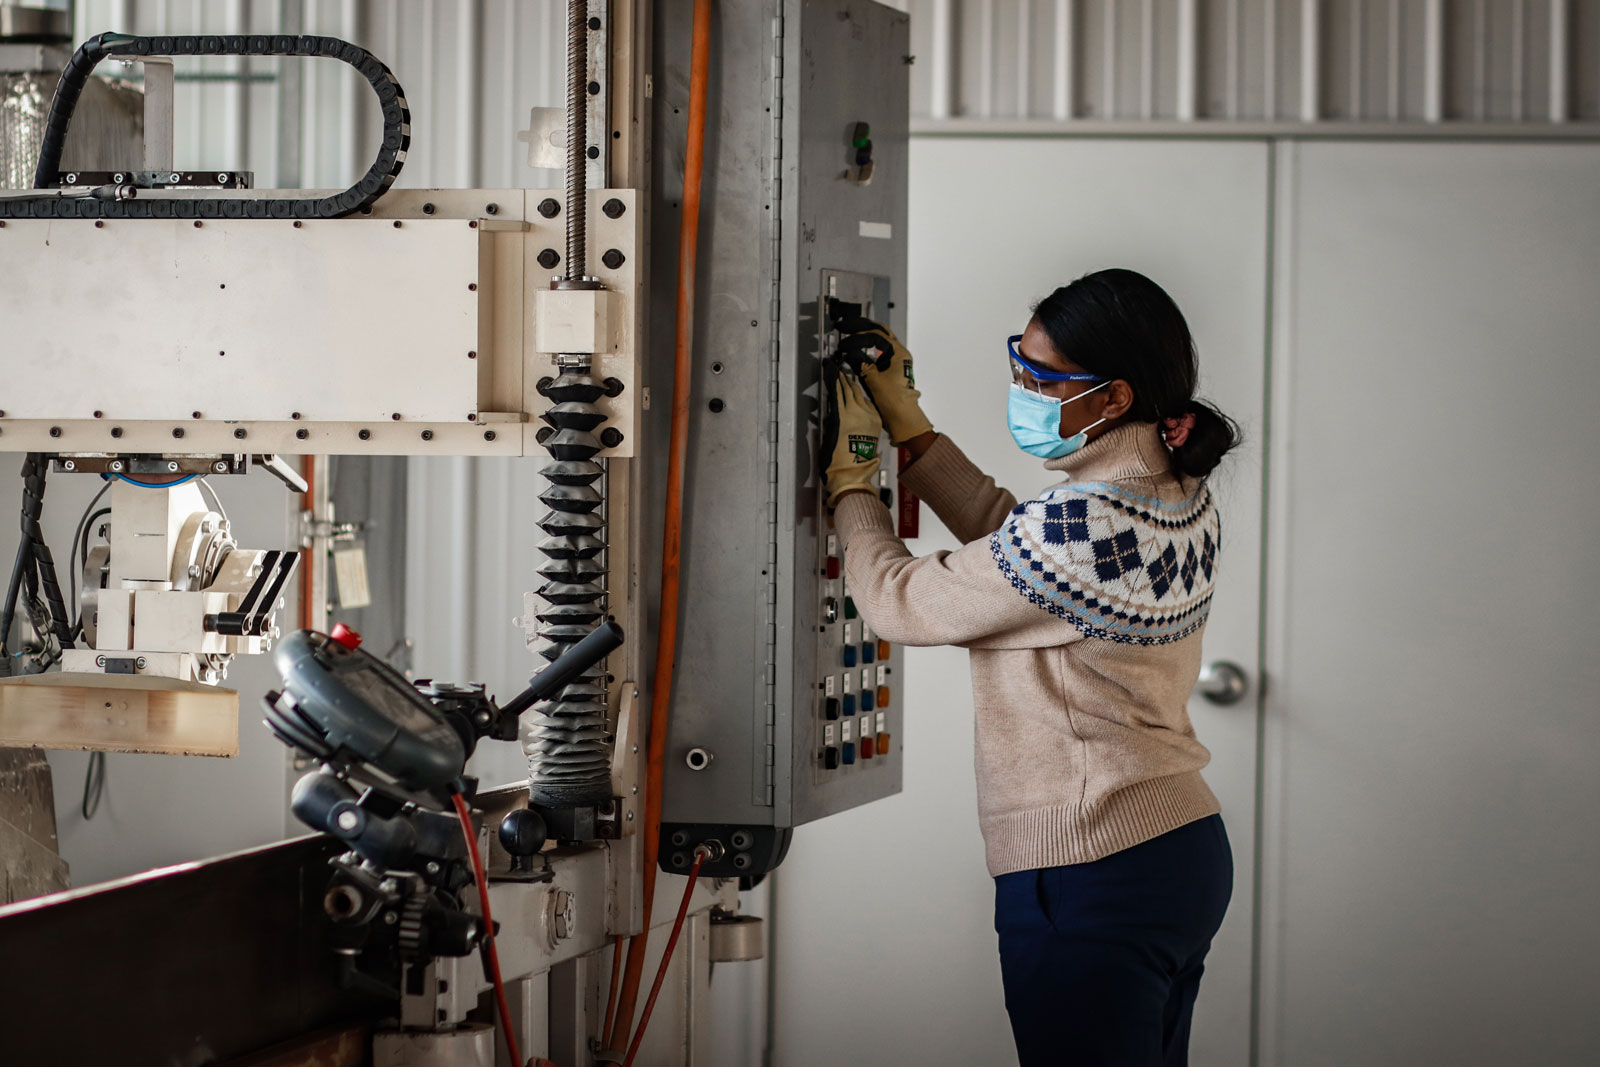 Female student works with equipment for a project